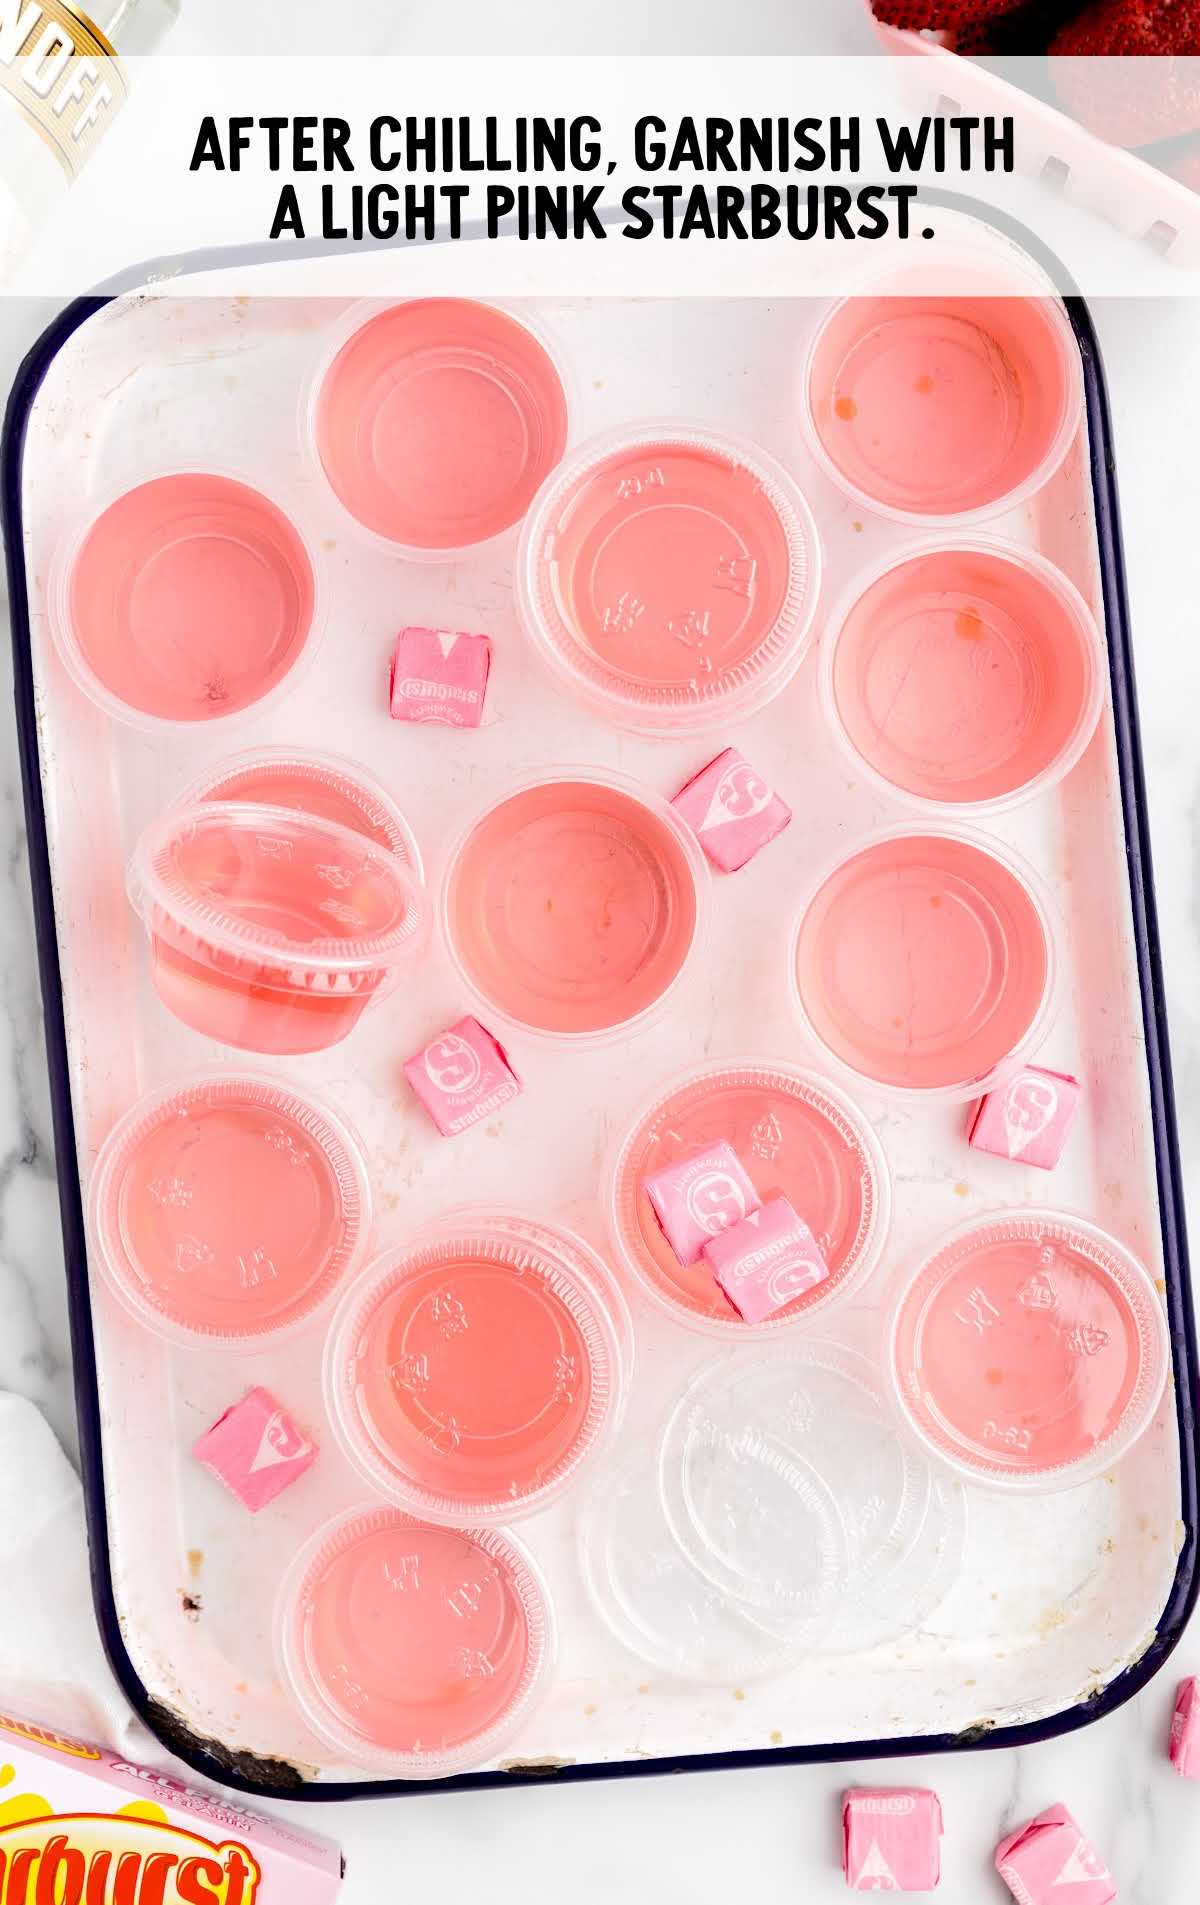 pink starburst garnished in the jello on a baking dish